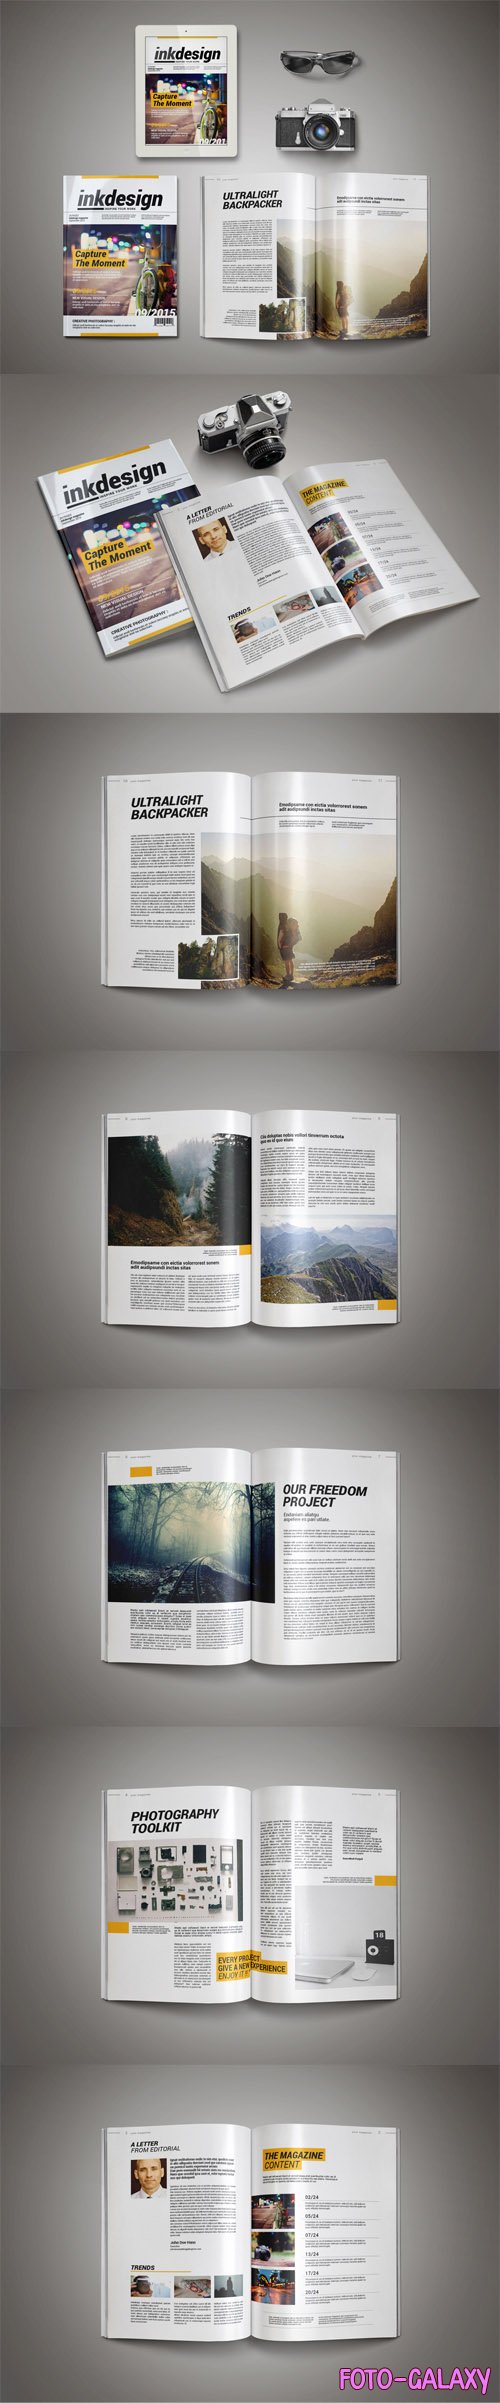 Professional InDesign Magazine Template [24 Pages]